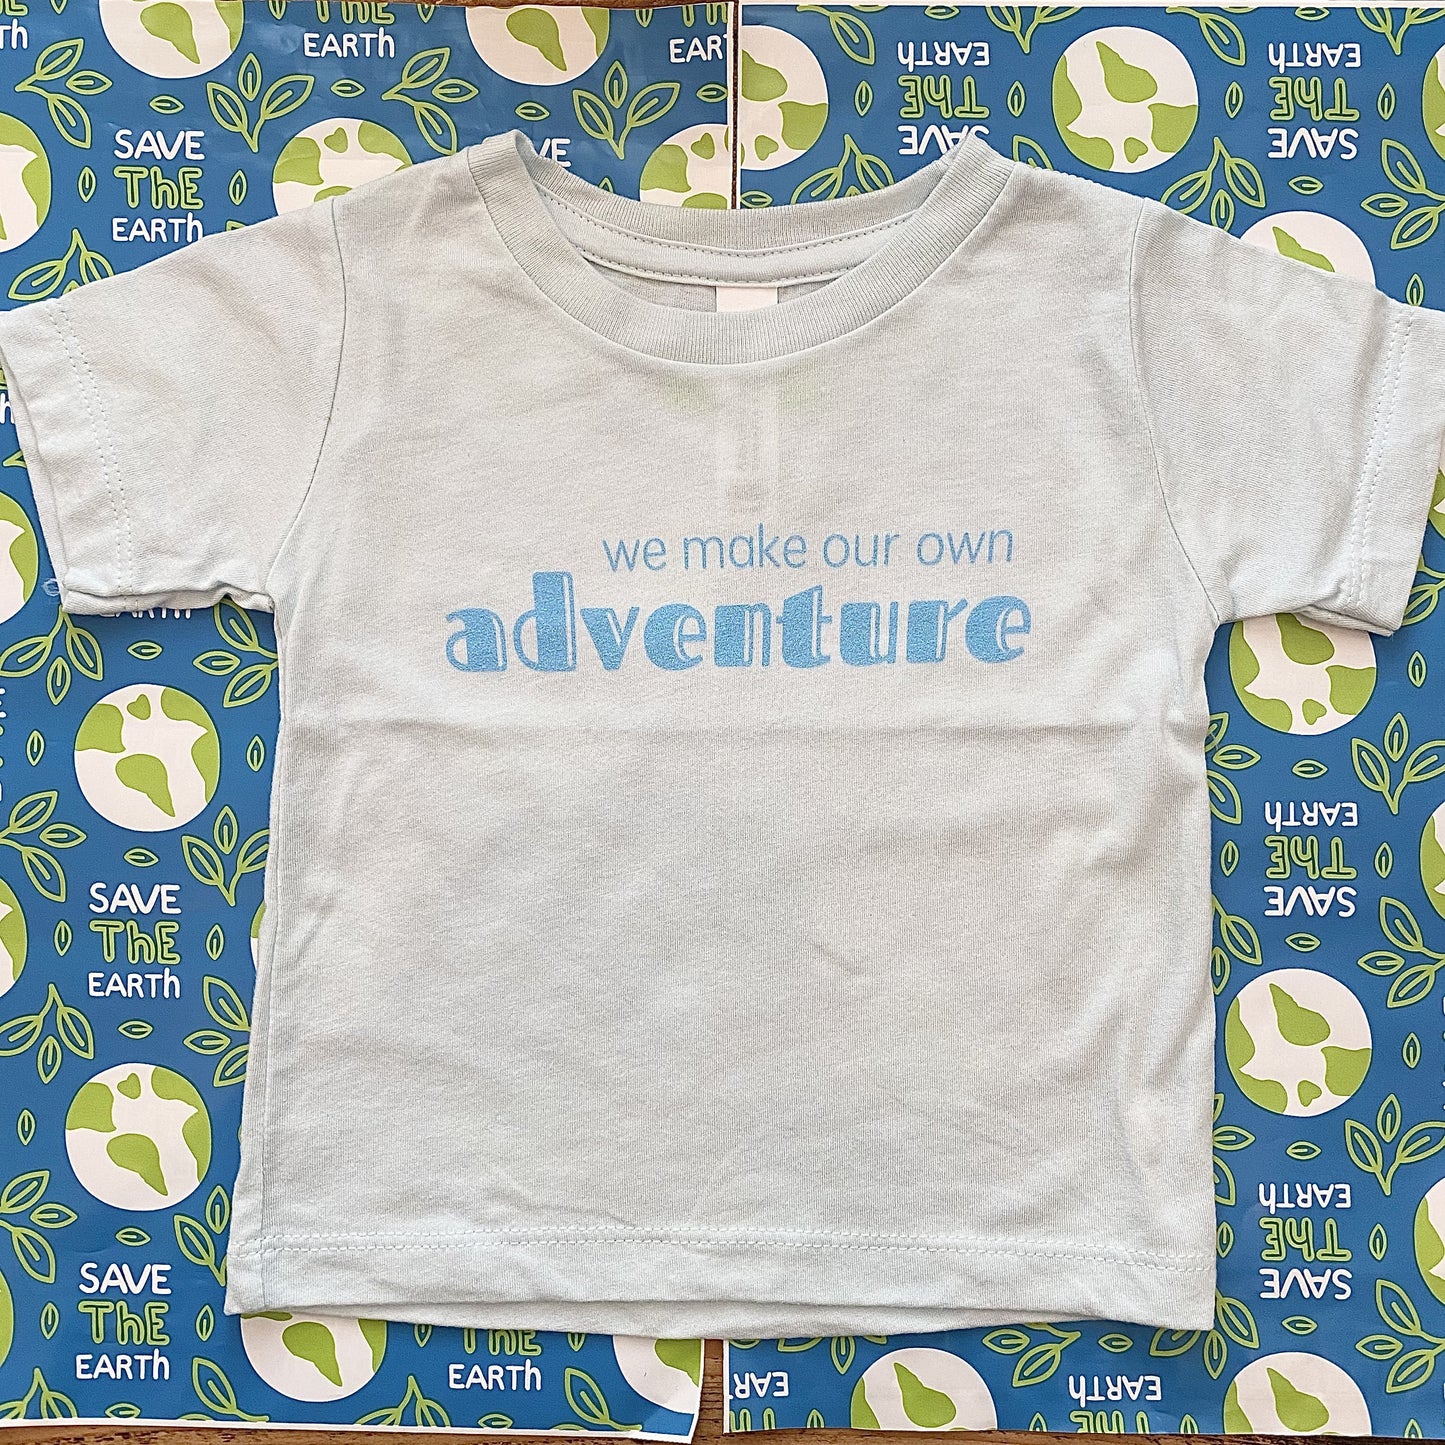 WE MAKE OUR OWN ADVENTURE - Short Sleeve Baby T Shirt - Little Mate Adventures